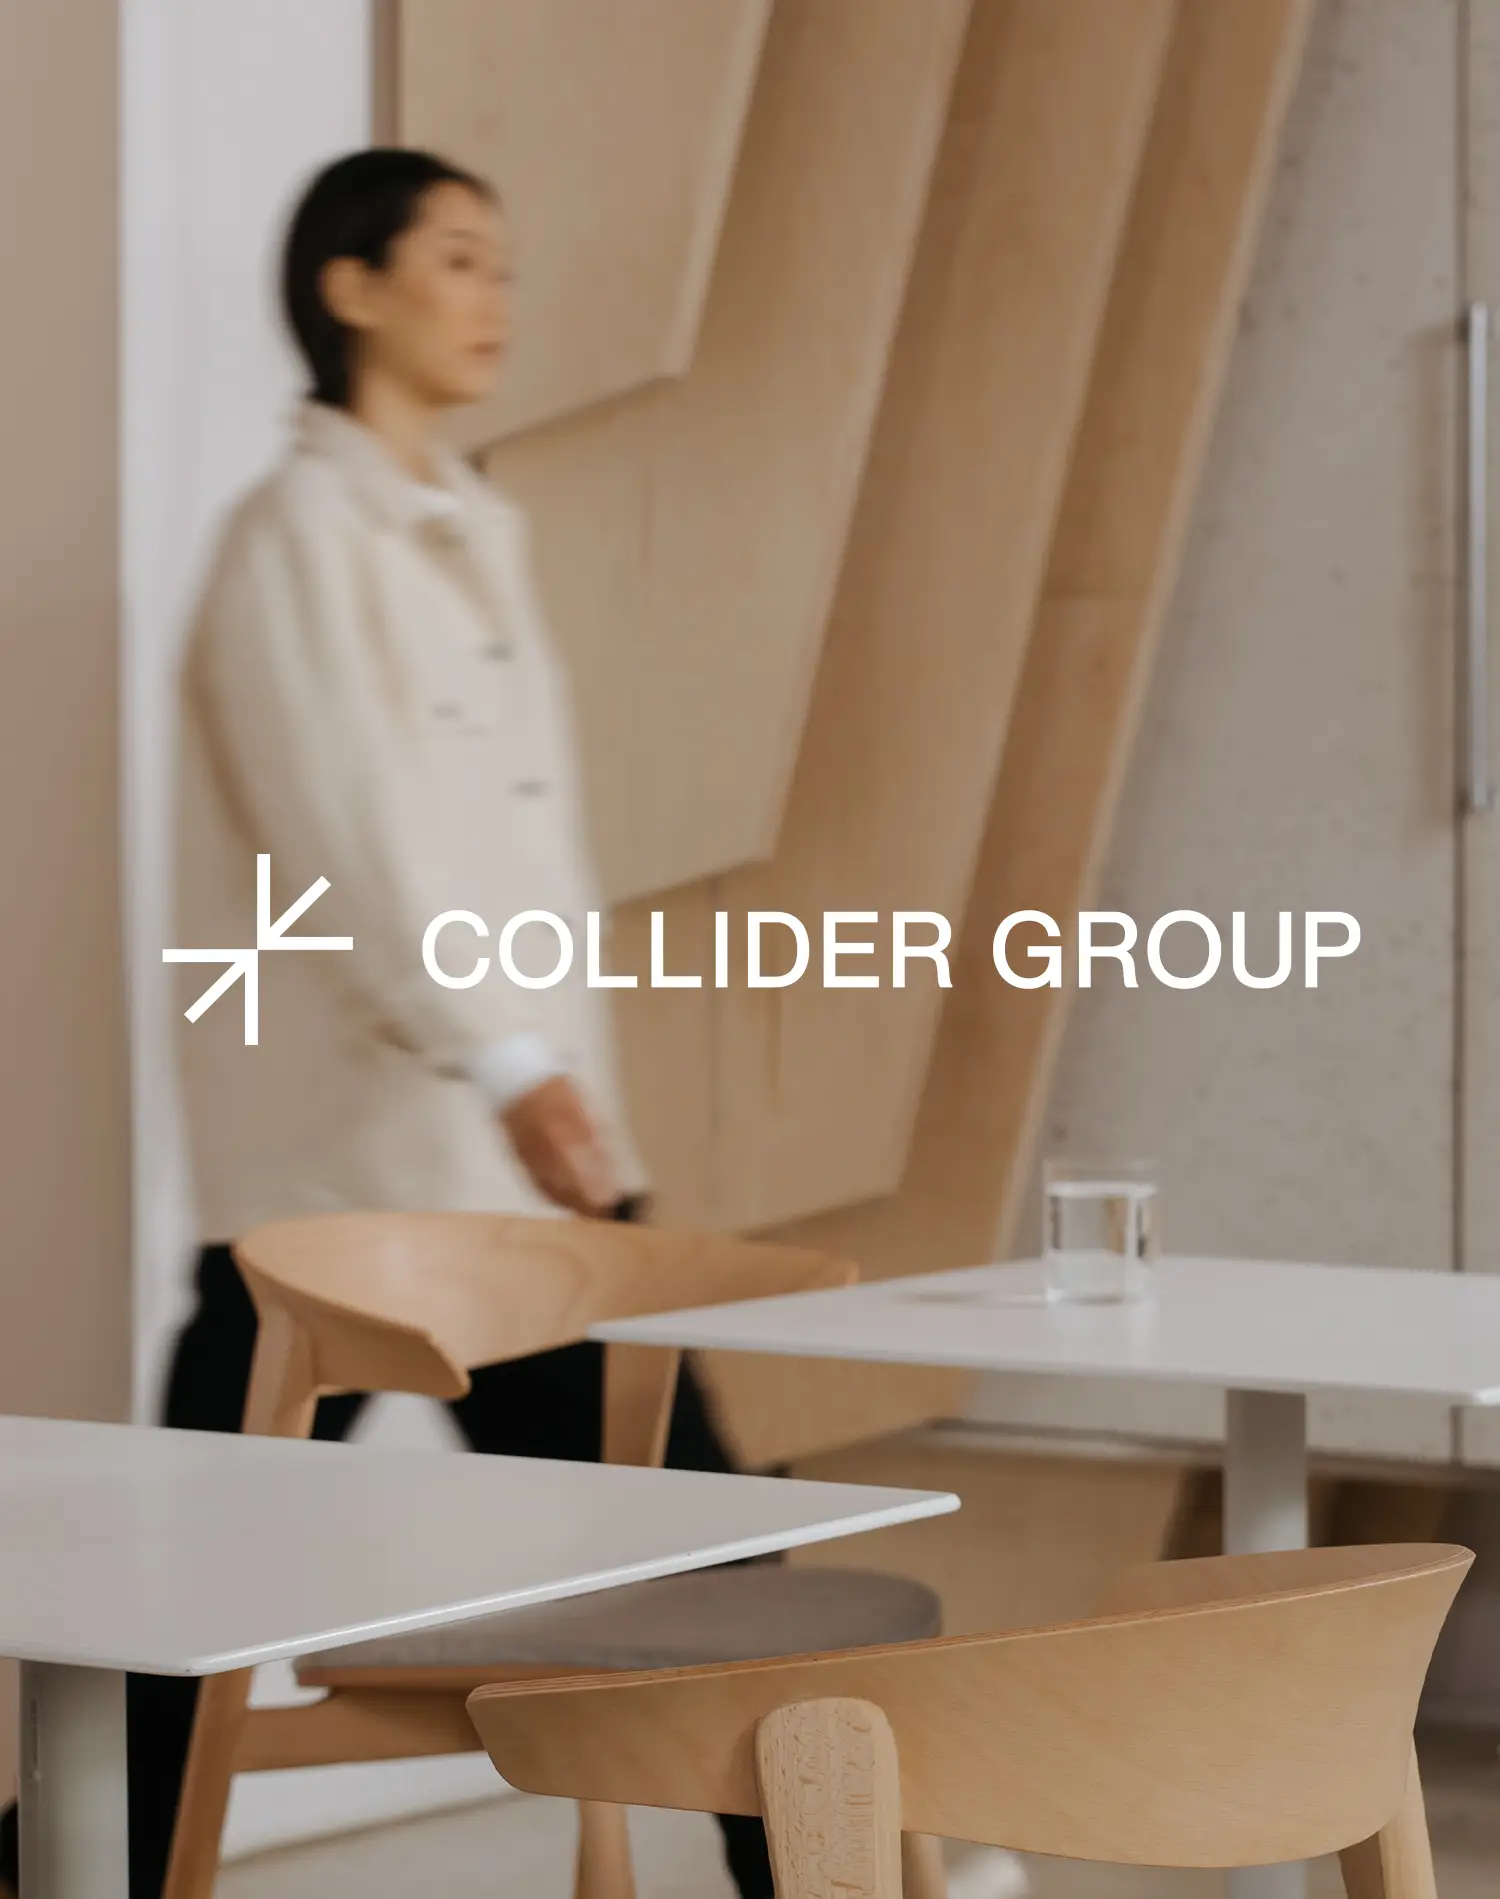 Collider Group logo over background image of woman walking in a modern workplace cafe